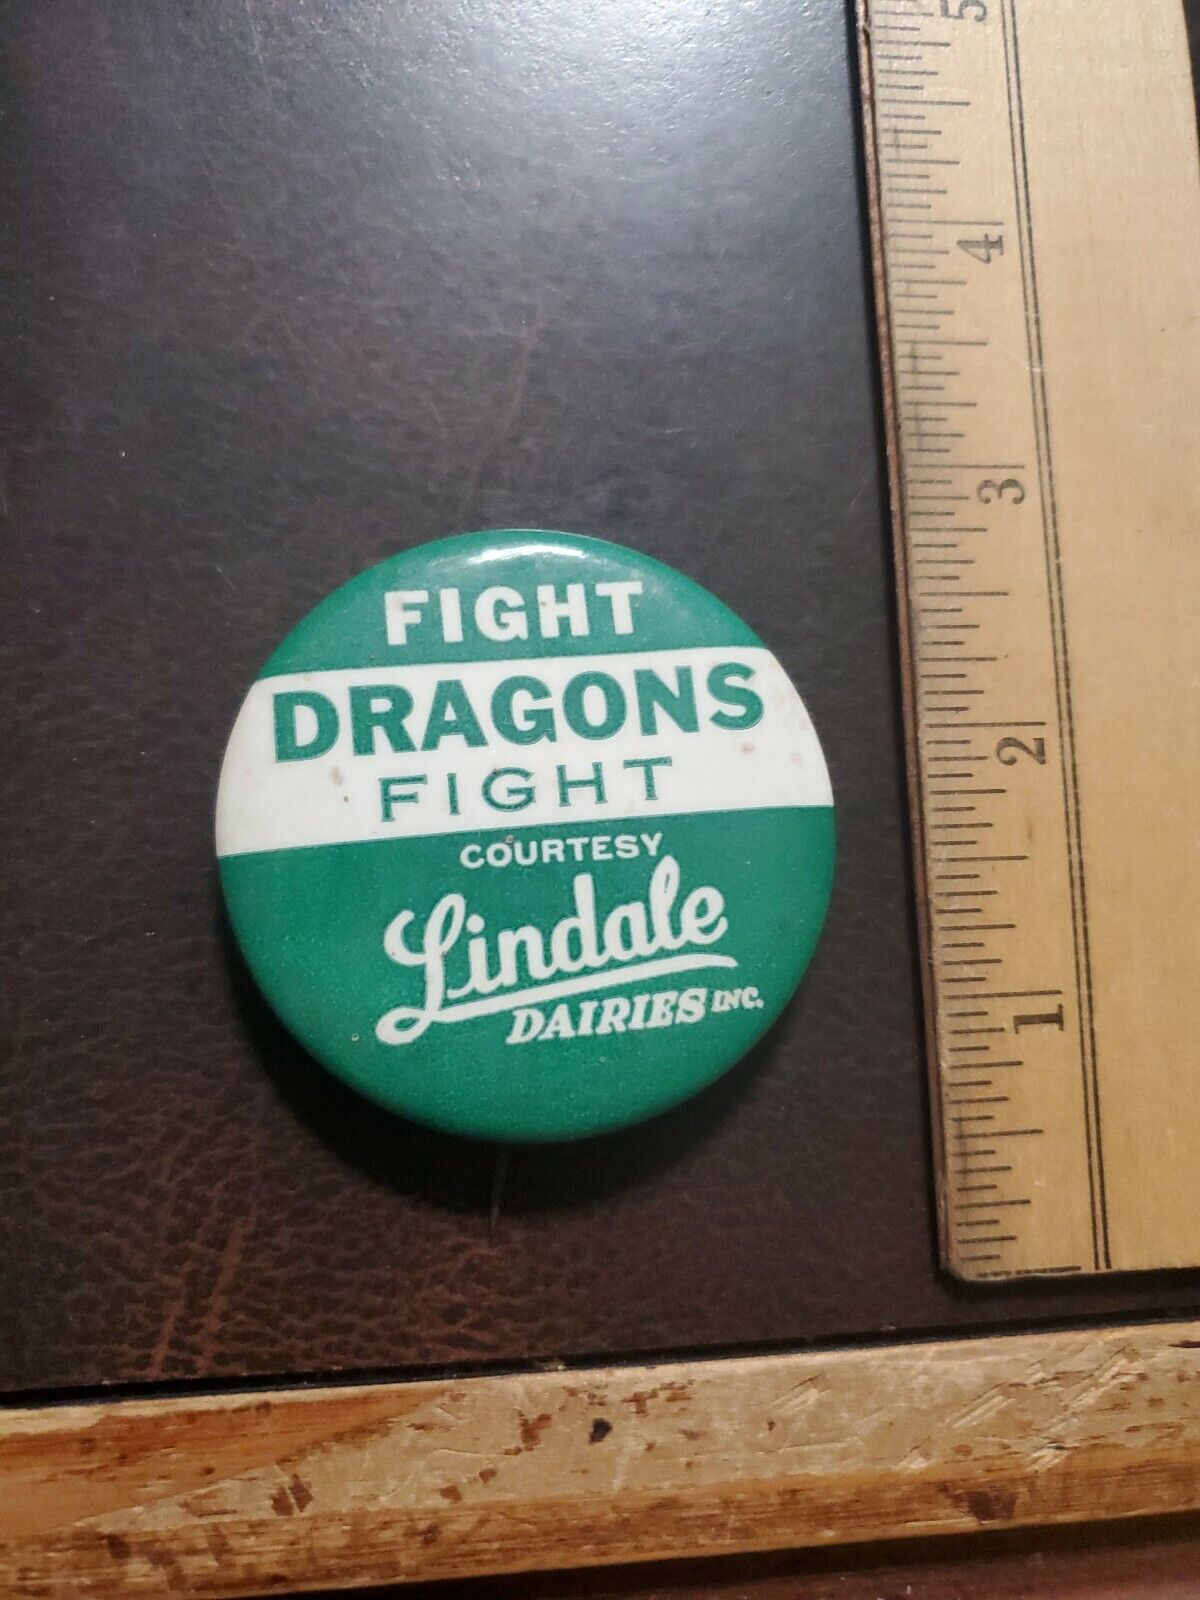 Vntg 1950-60 HS Advertising Button Lindale Dairies Dragons